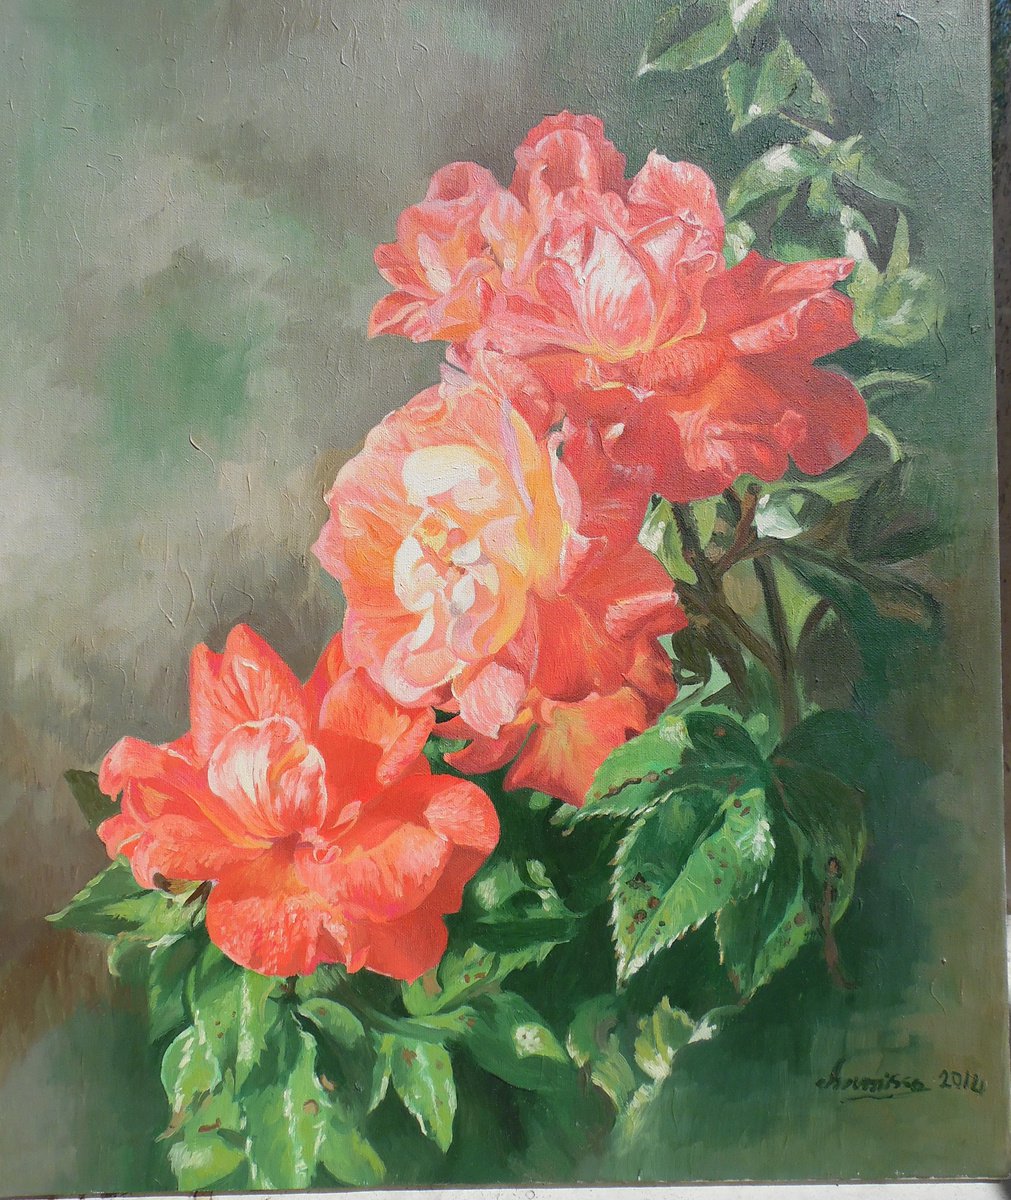 Red roses by Vivien Choumissa